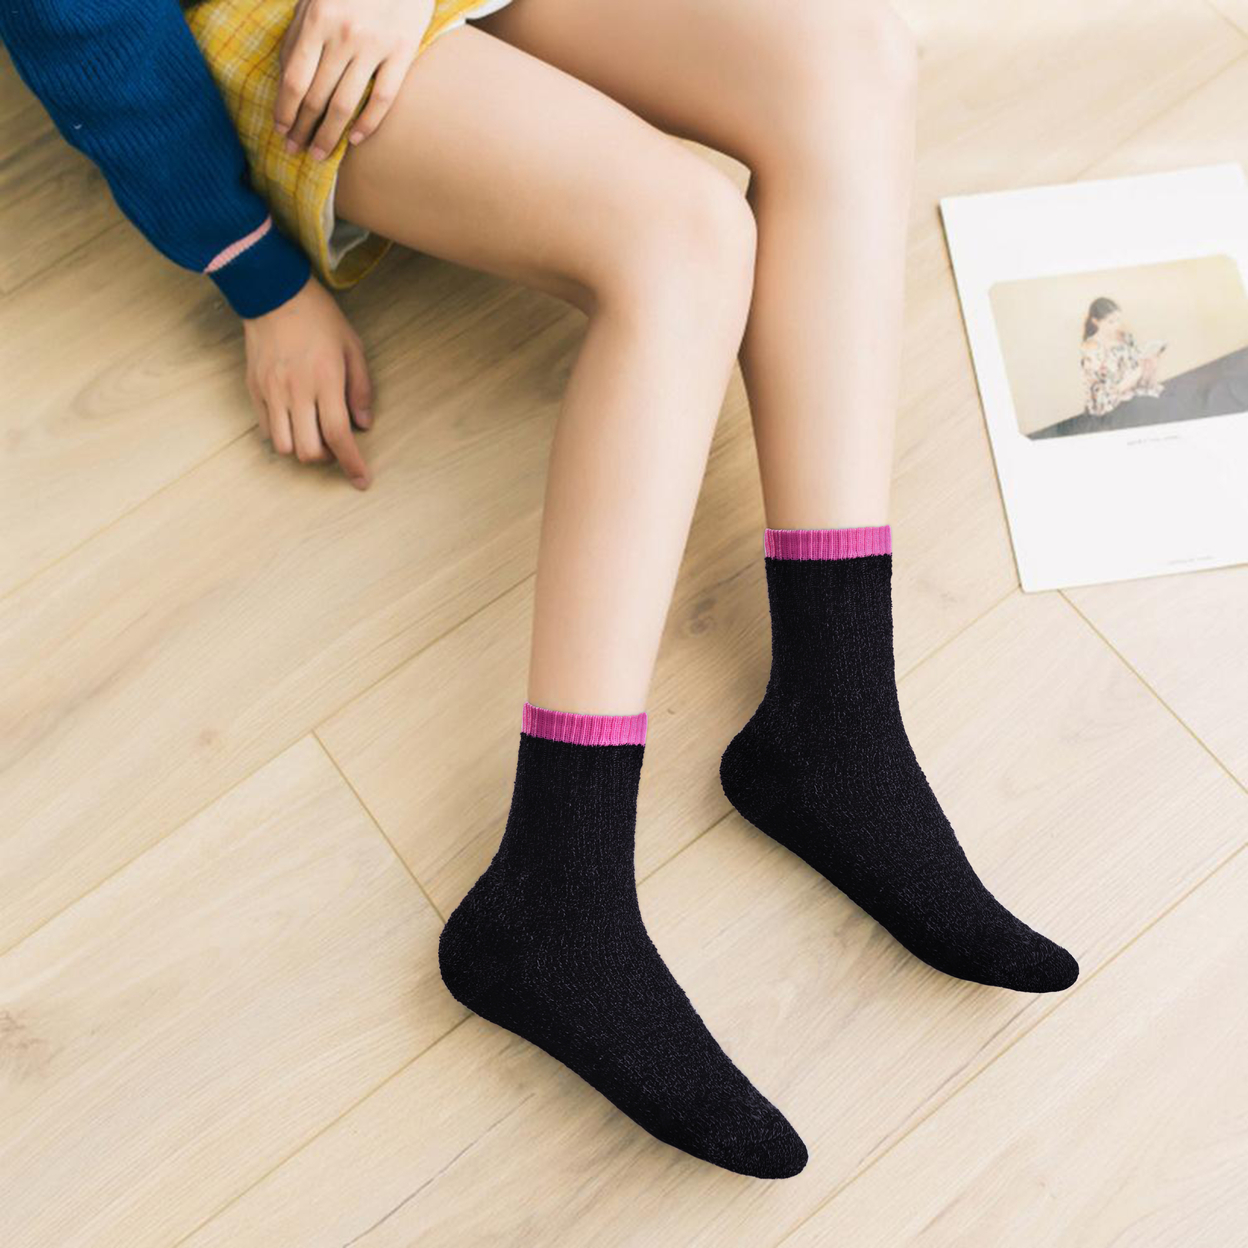 2-Pairs: Women's Cozy Soft Thick Winter Warm Thermal Insulated Heated Crew Socks